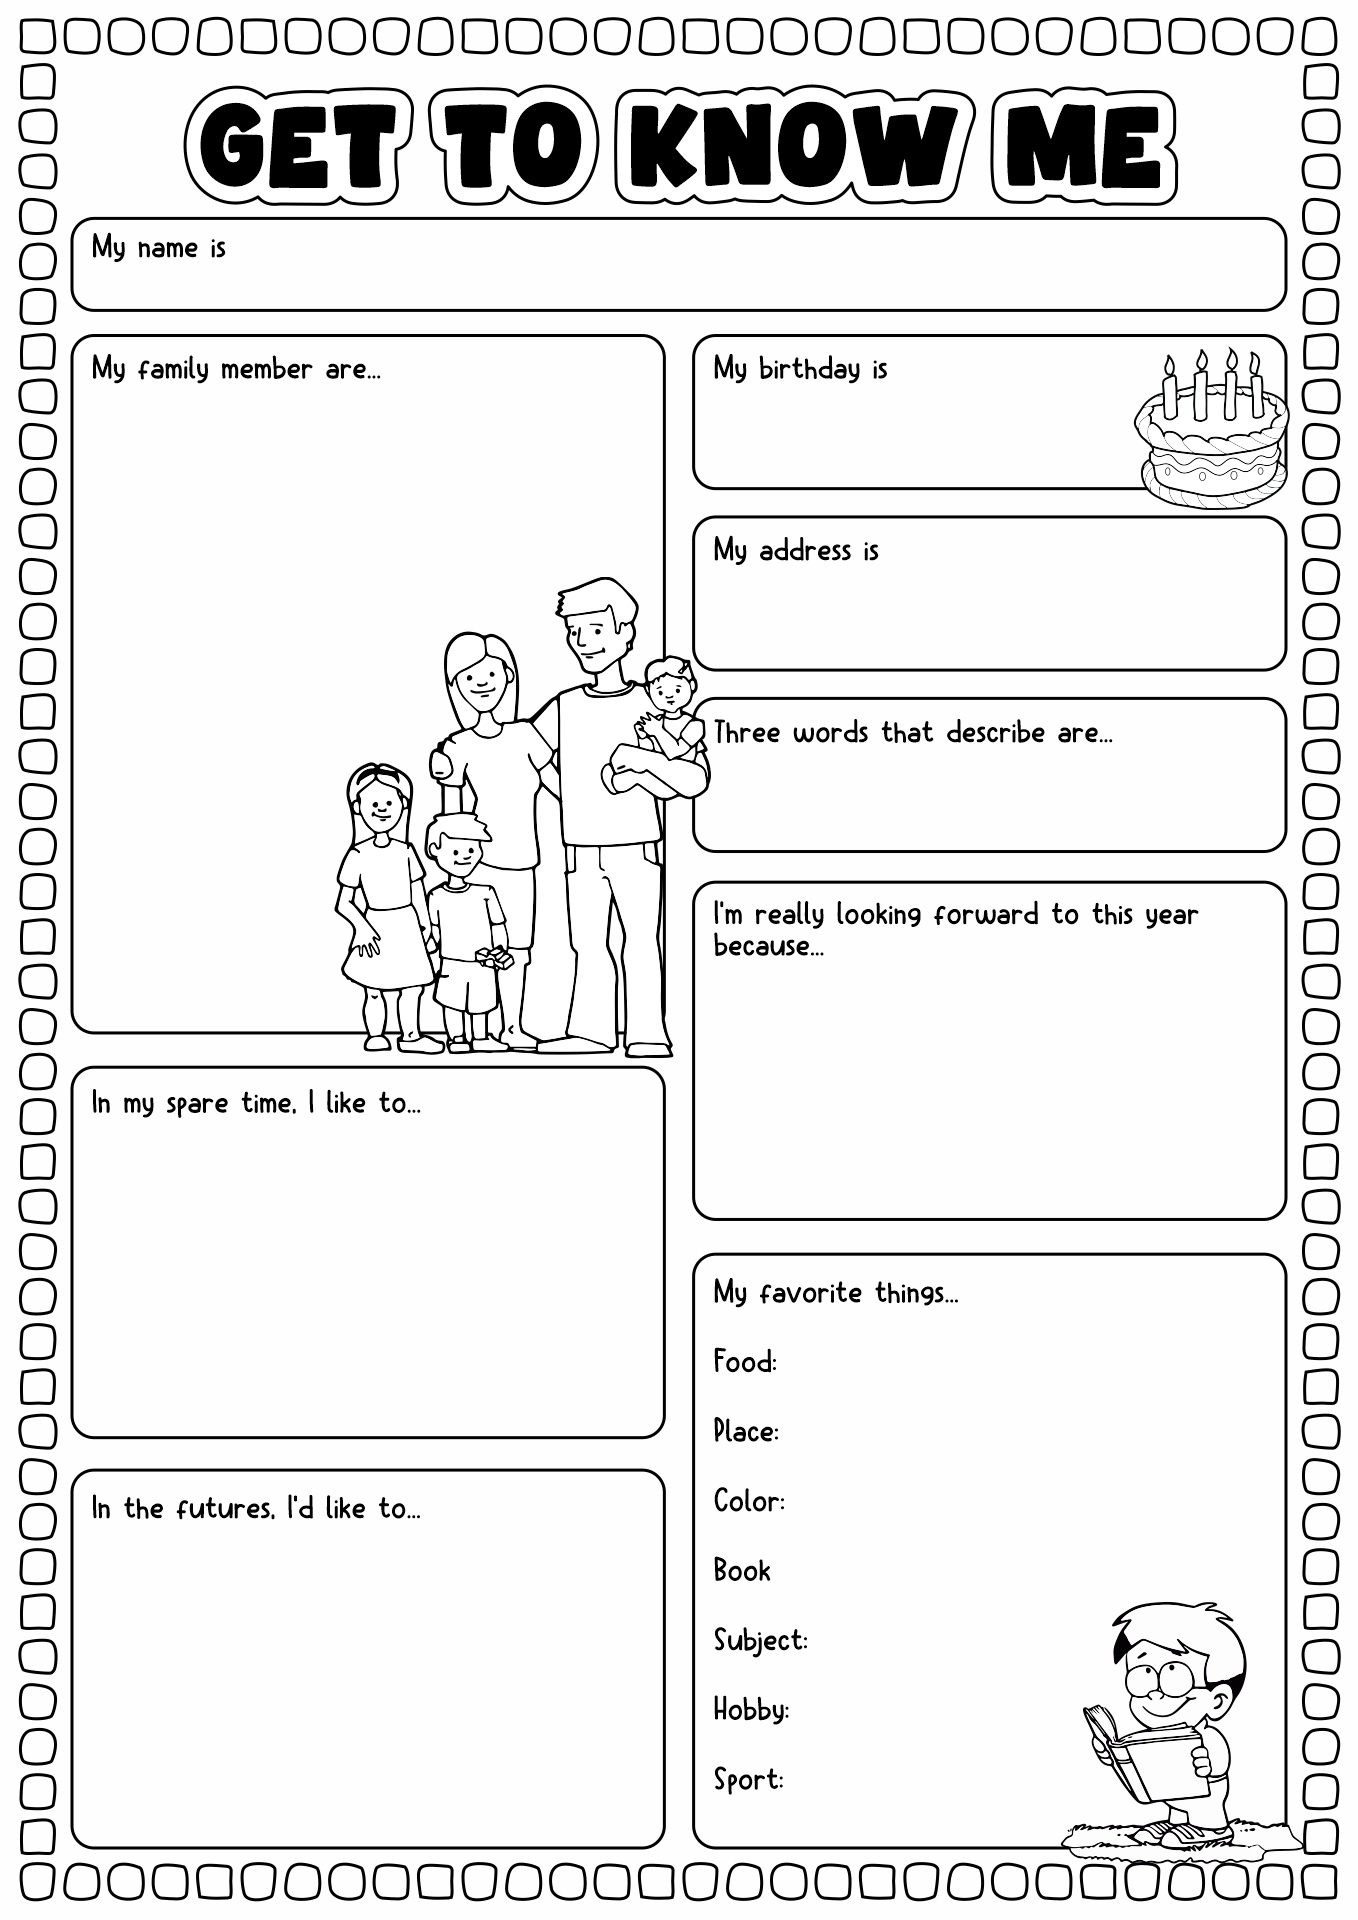 Getting to Know You Worksheet Middle School